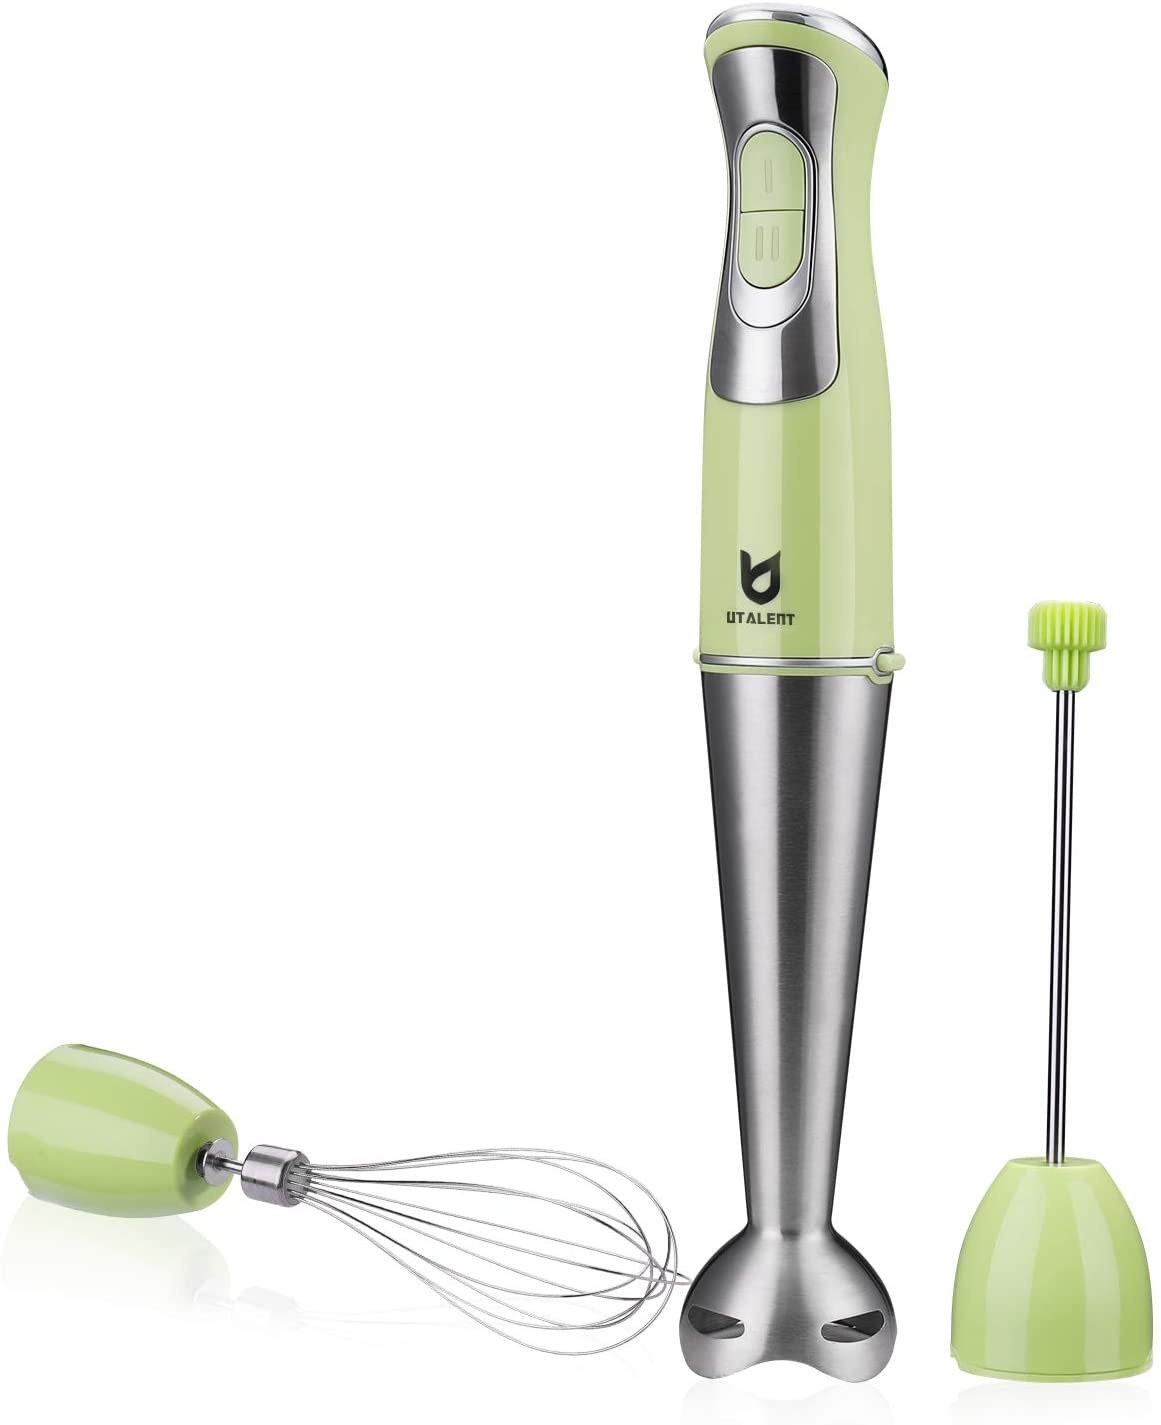 The green immersion blender which comes with whisk and frother attachments